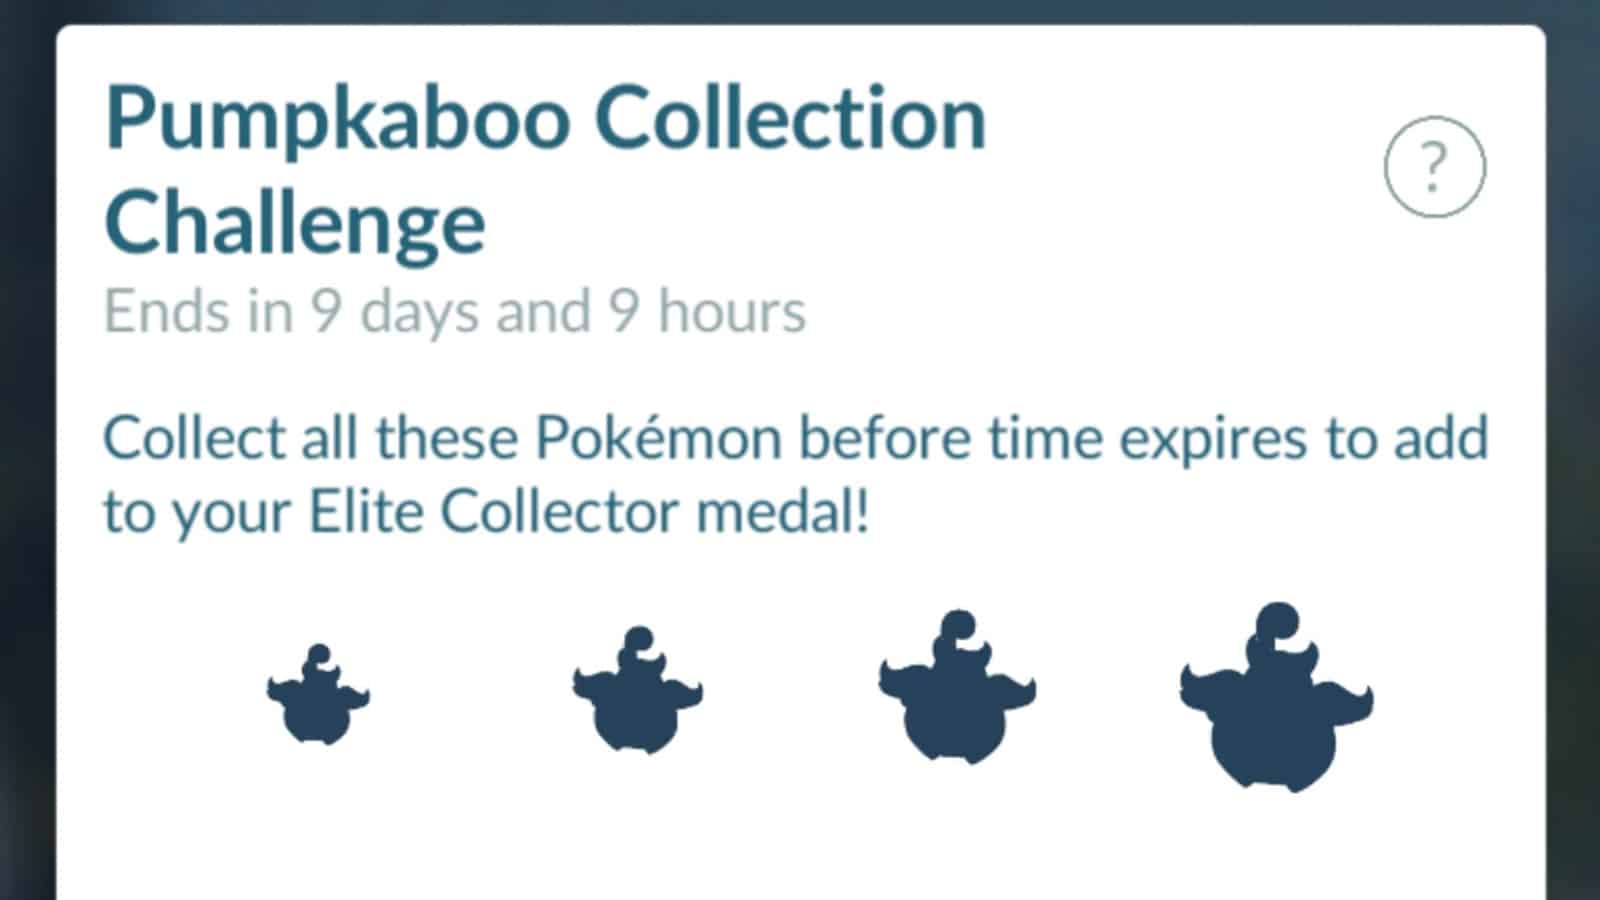 The Pumpkaboo Collection Challenge in Pokemon Go